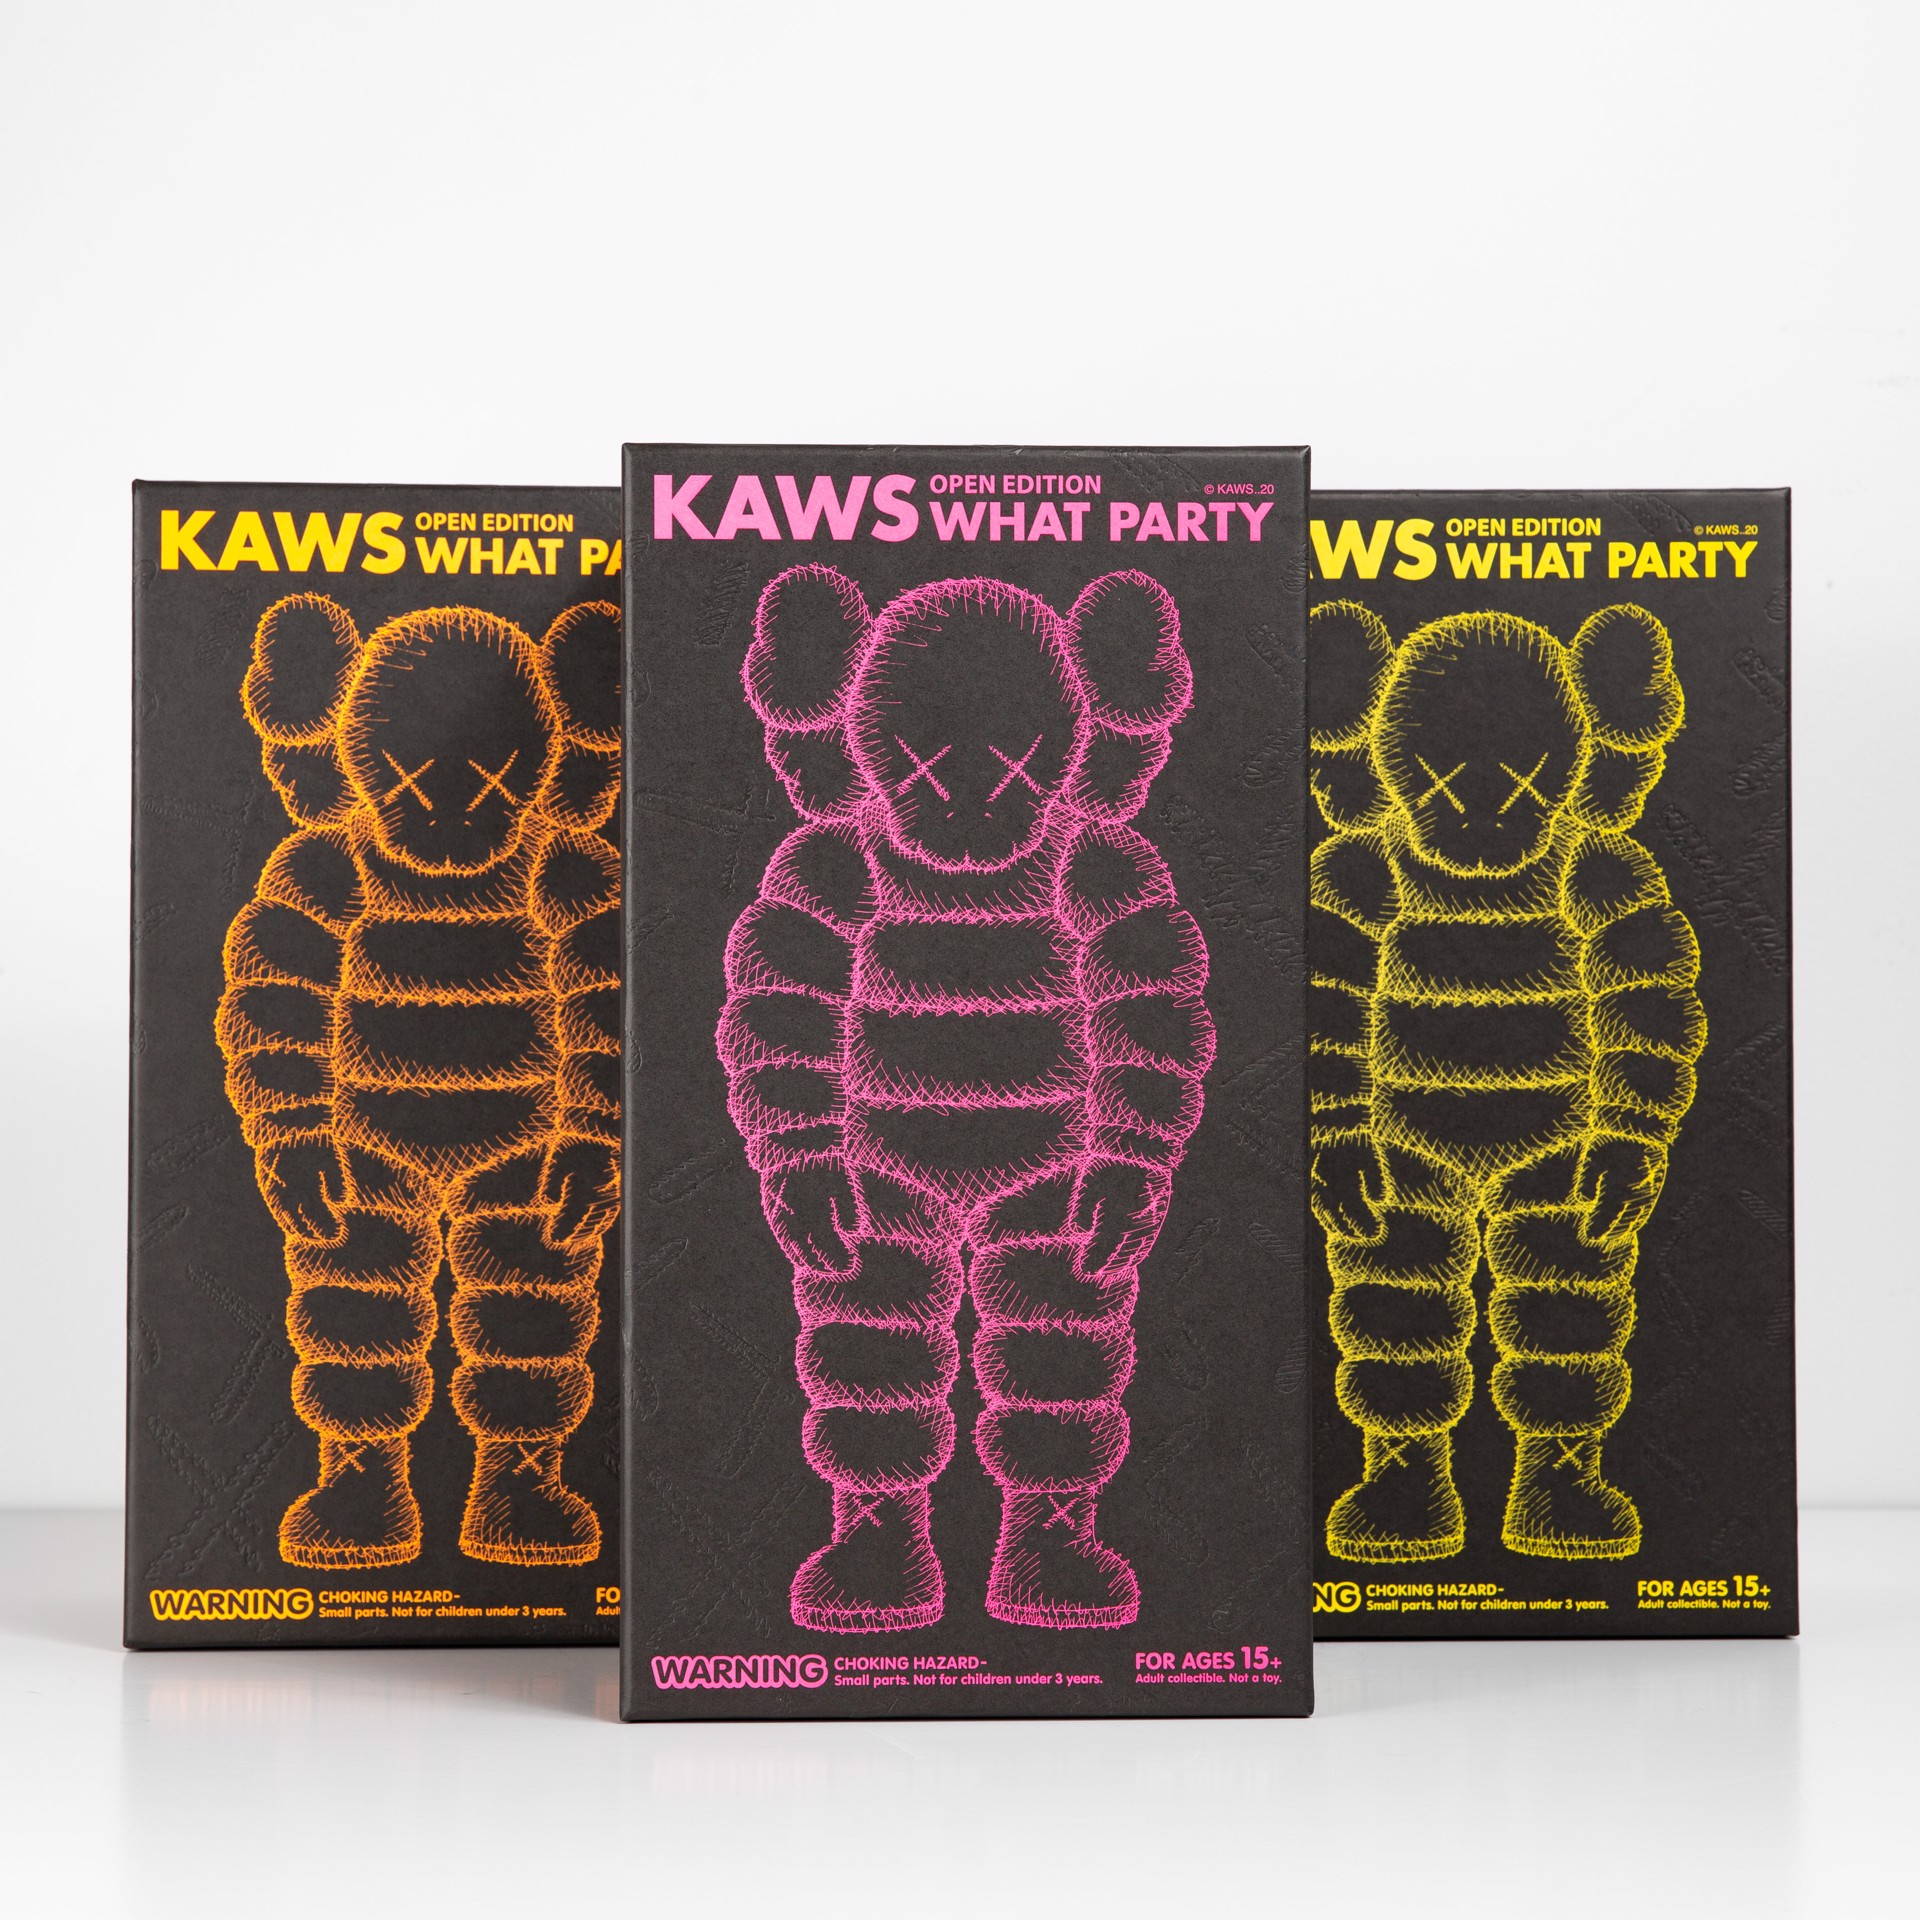 What Party (Yellow) by Kaws